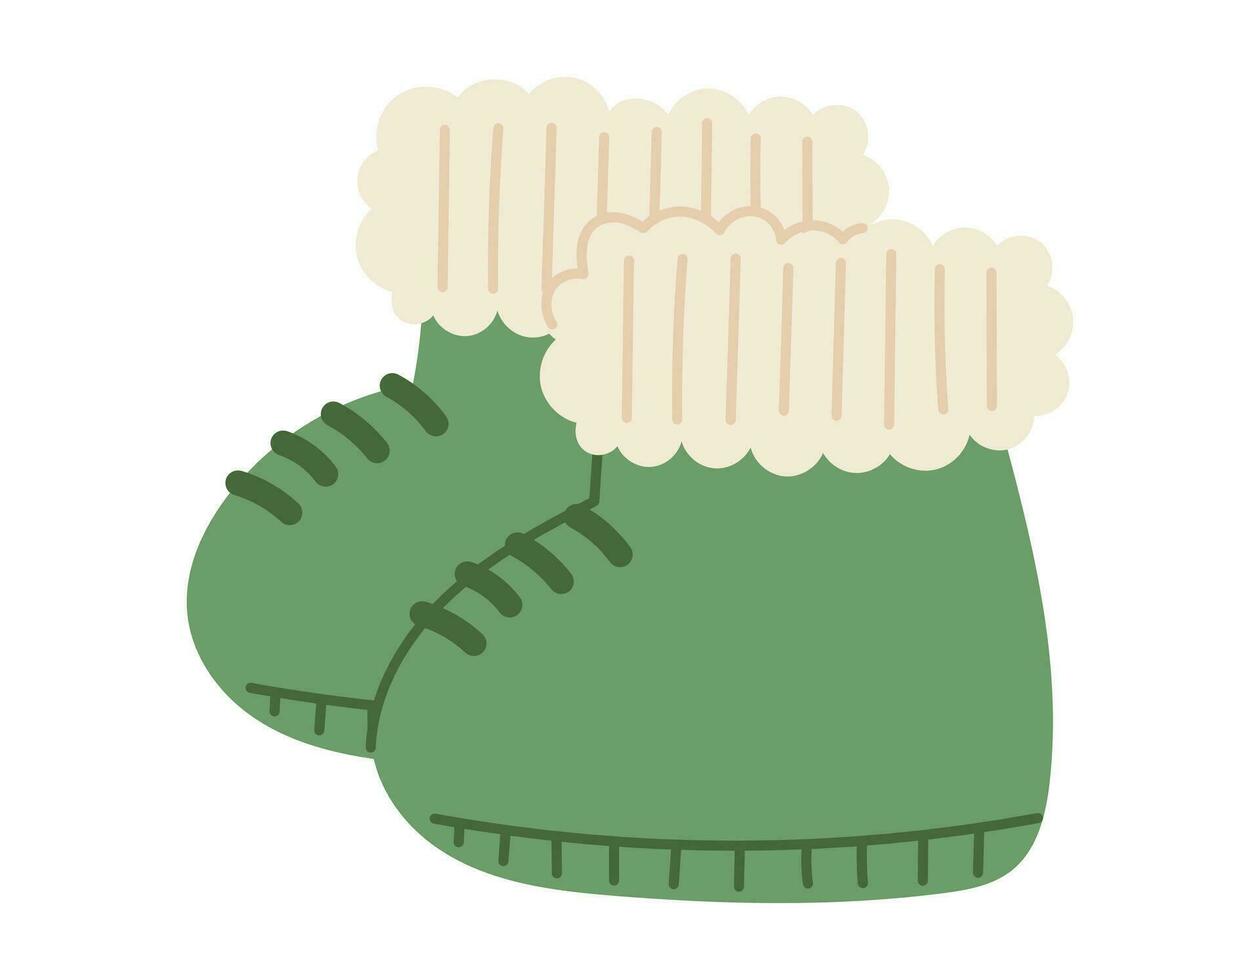 Children cartoon warm winter shoes, baby knitted green booties or socks. Vector isolated flat illustration.